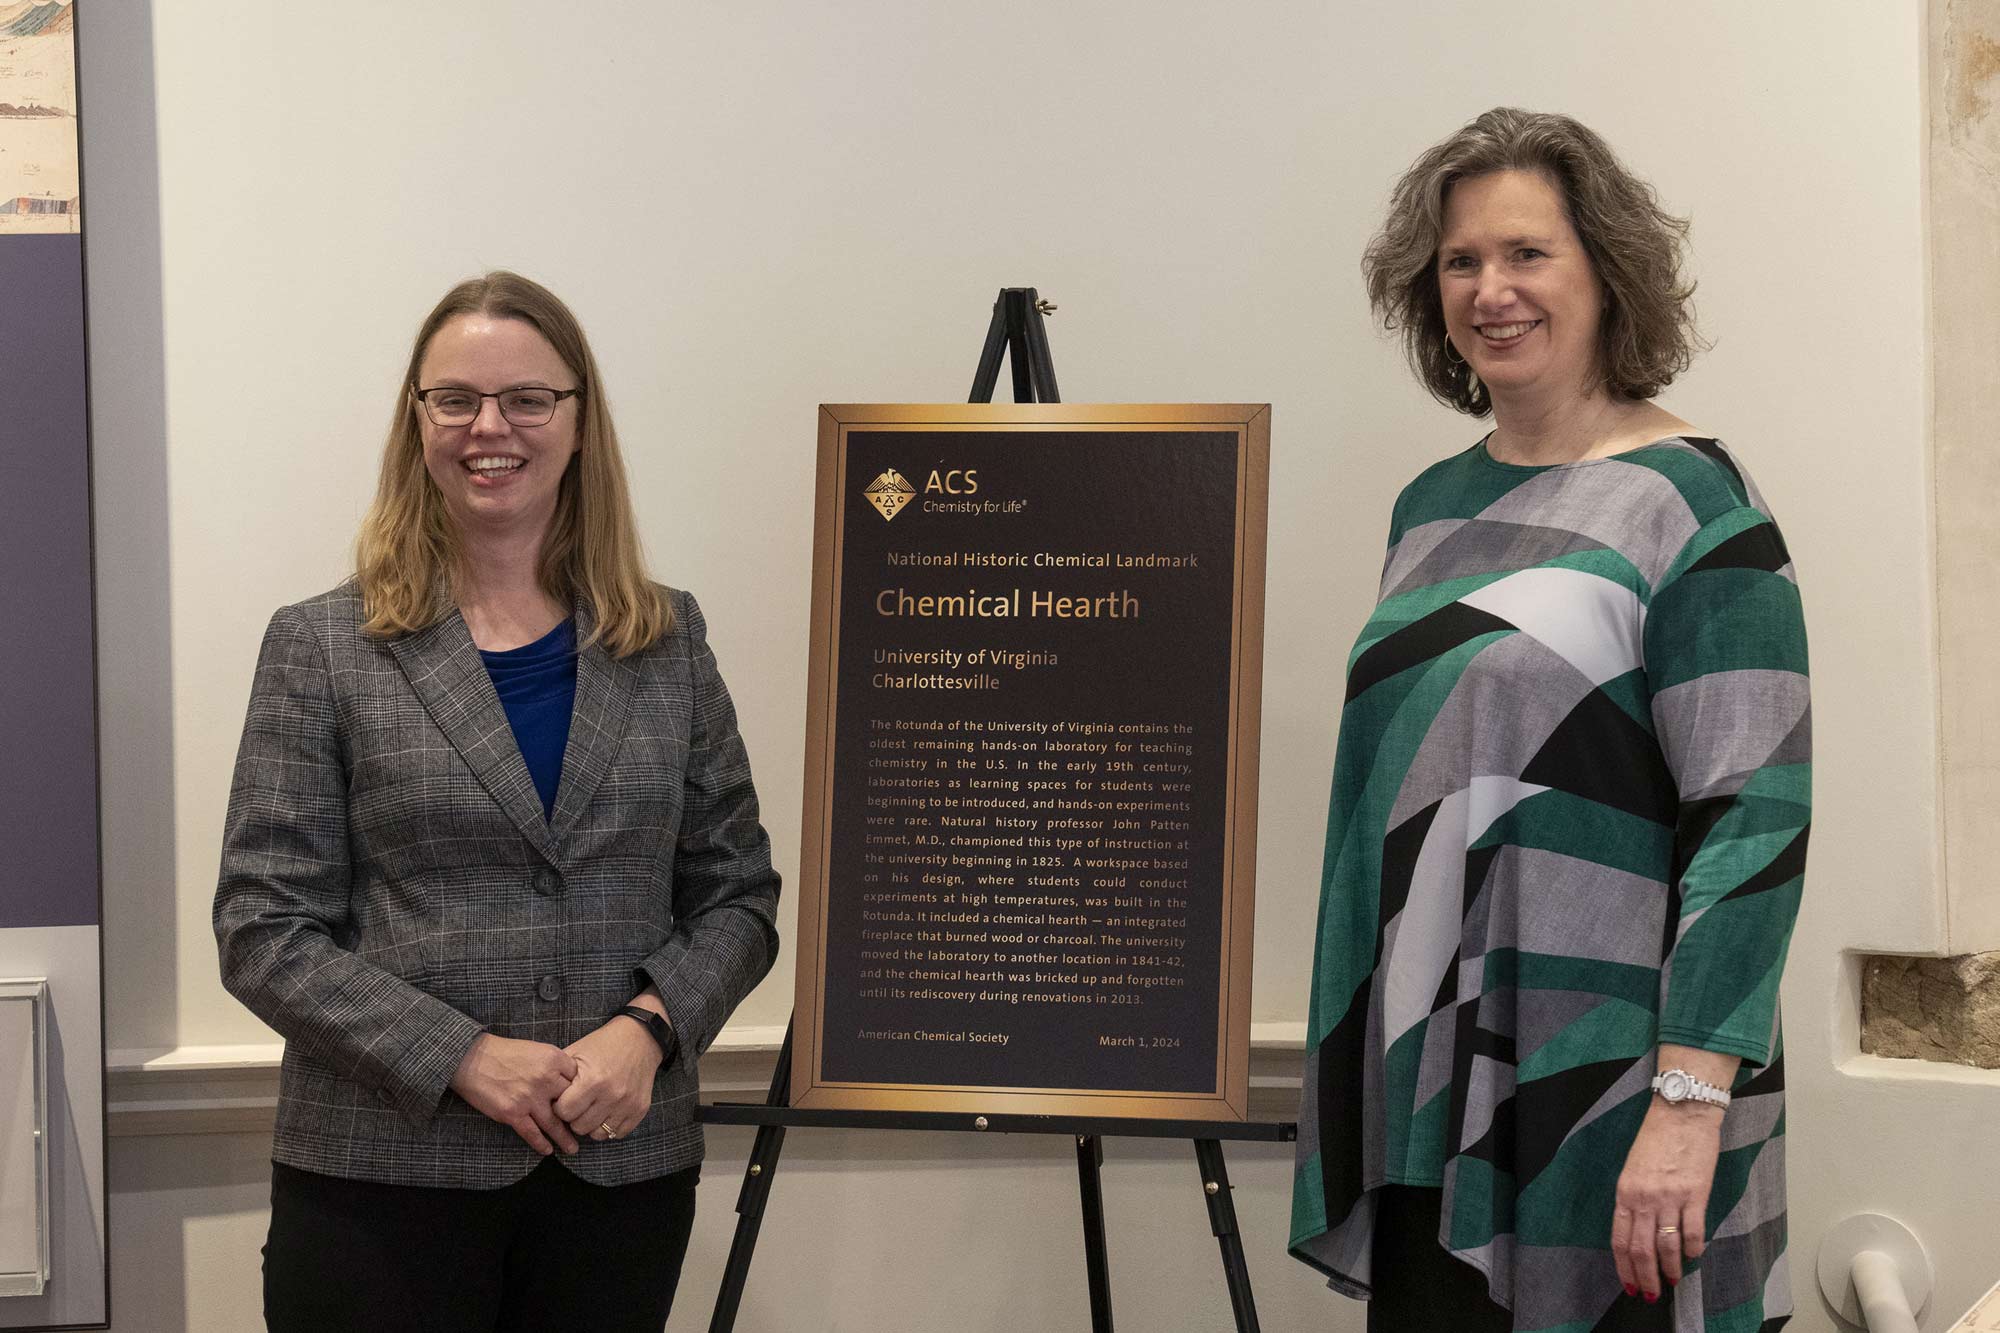 Formal portrait of Jill Venton and Mary K. Carroll standing infront of the historic plaque